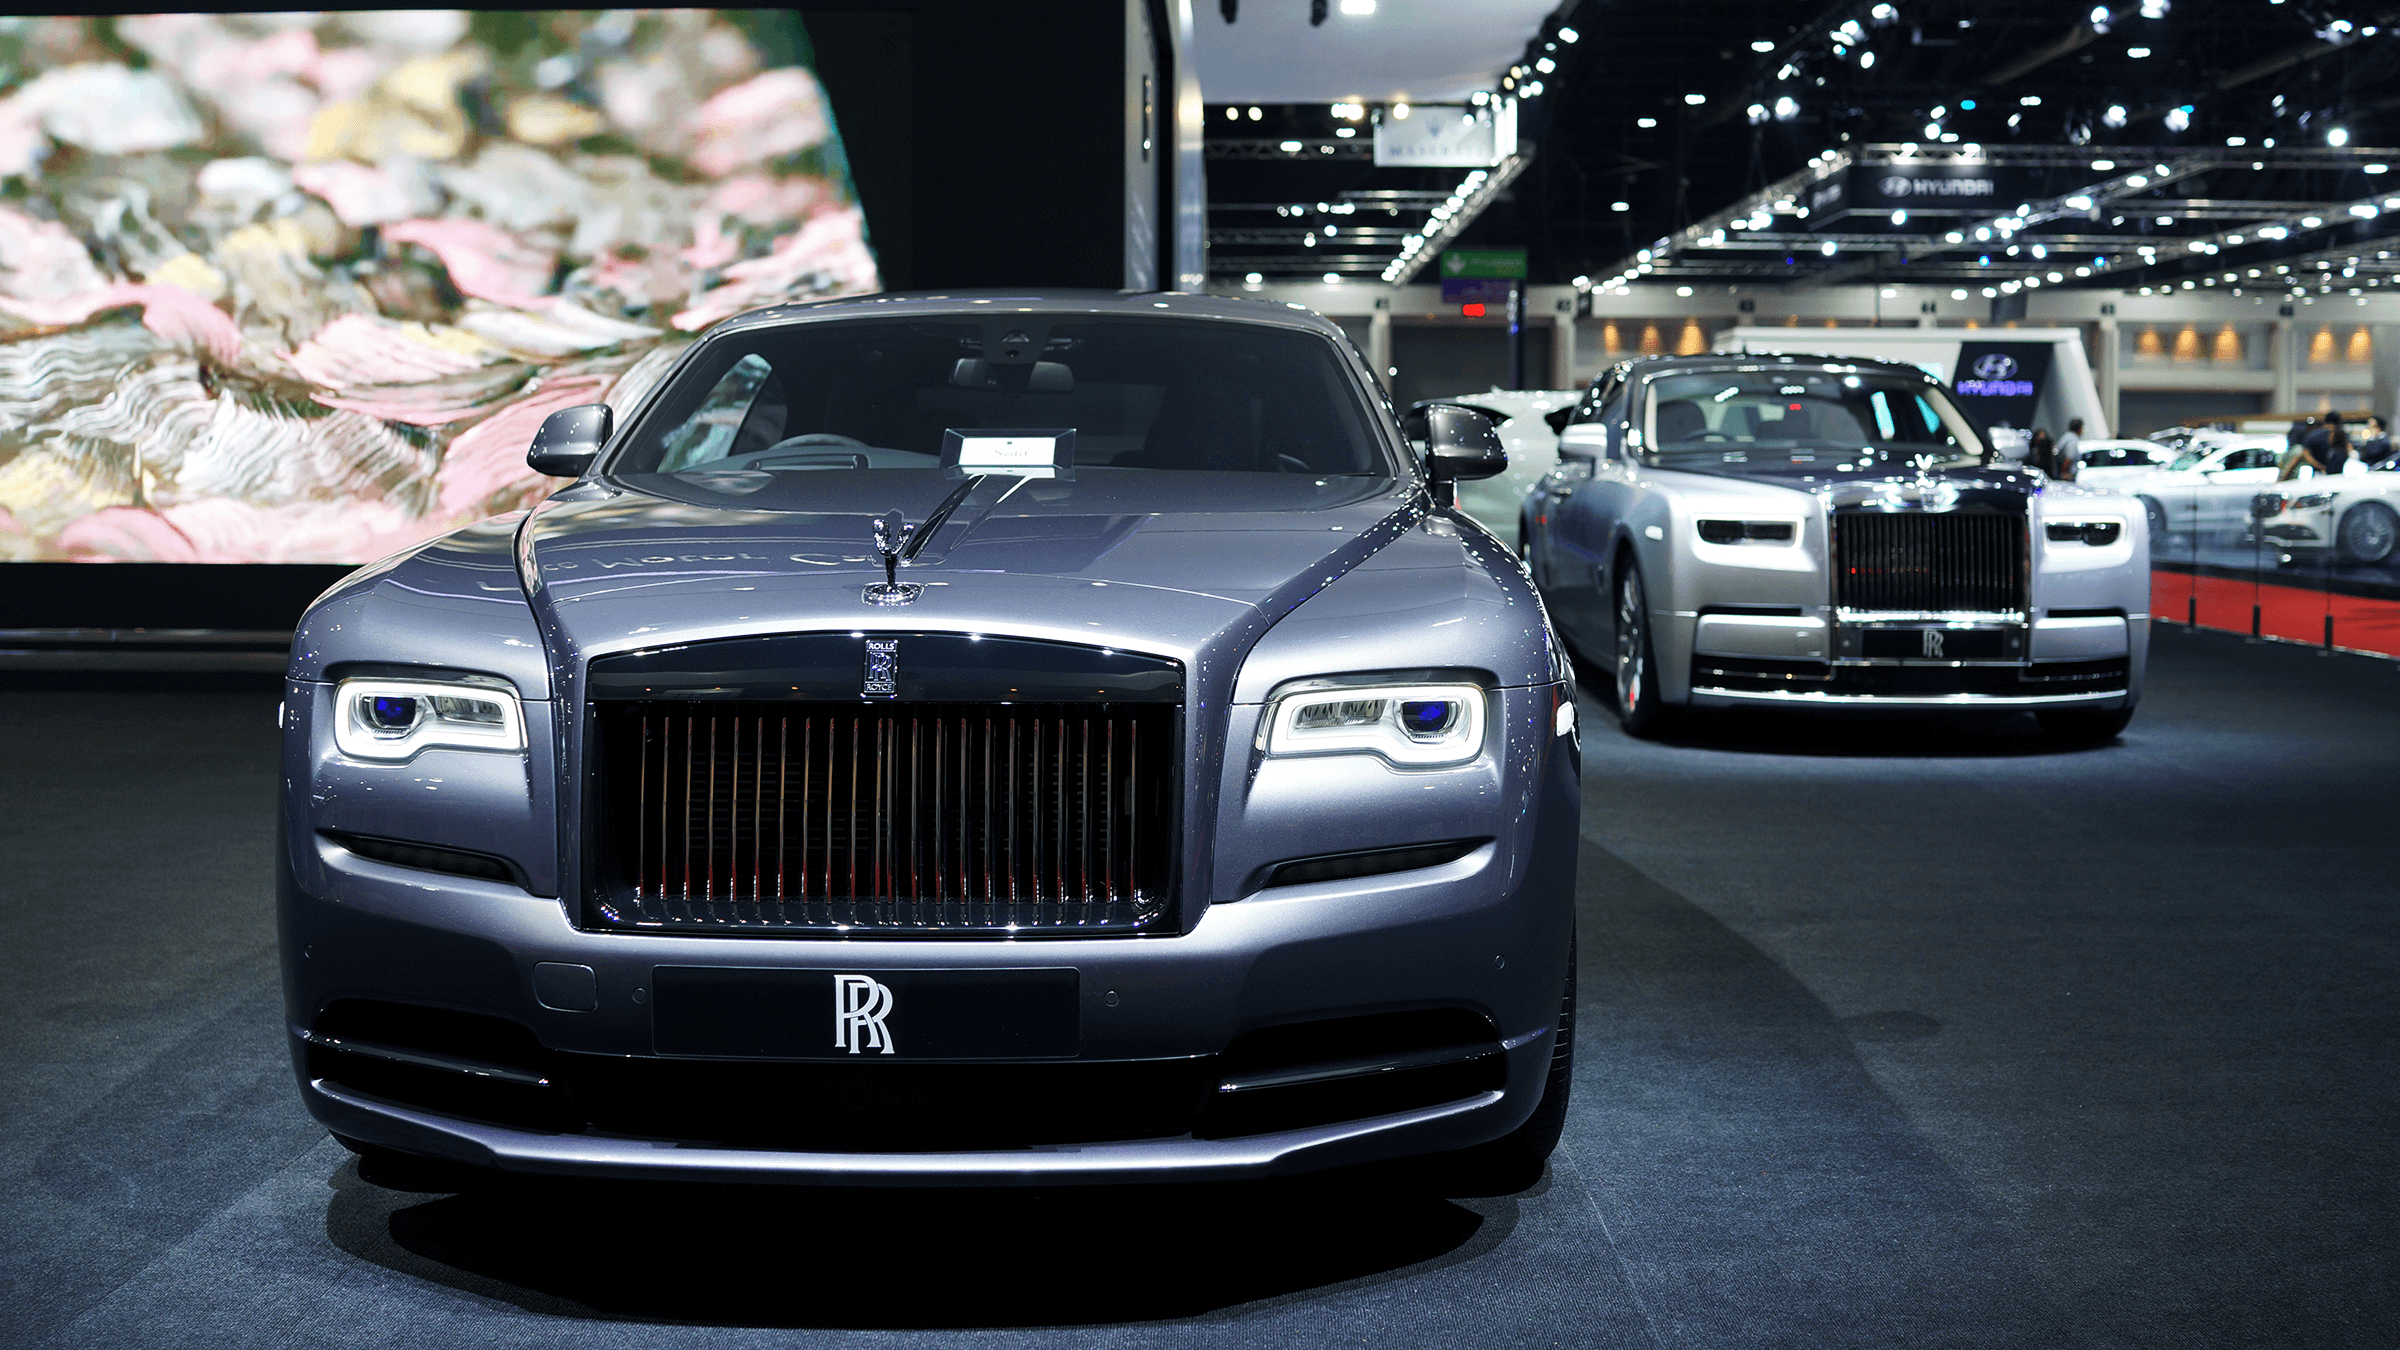 Two silver Rolls Royce cars sit side by side at an expo